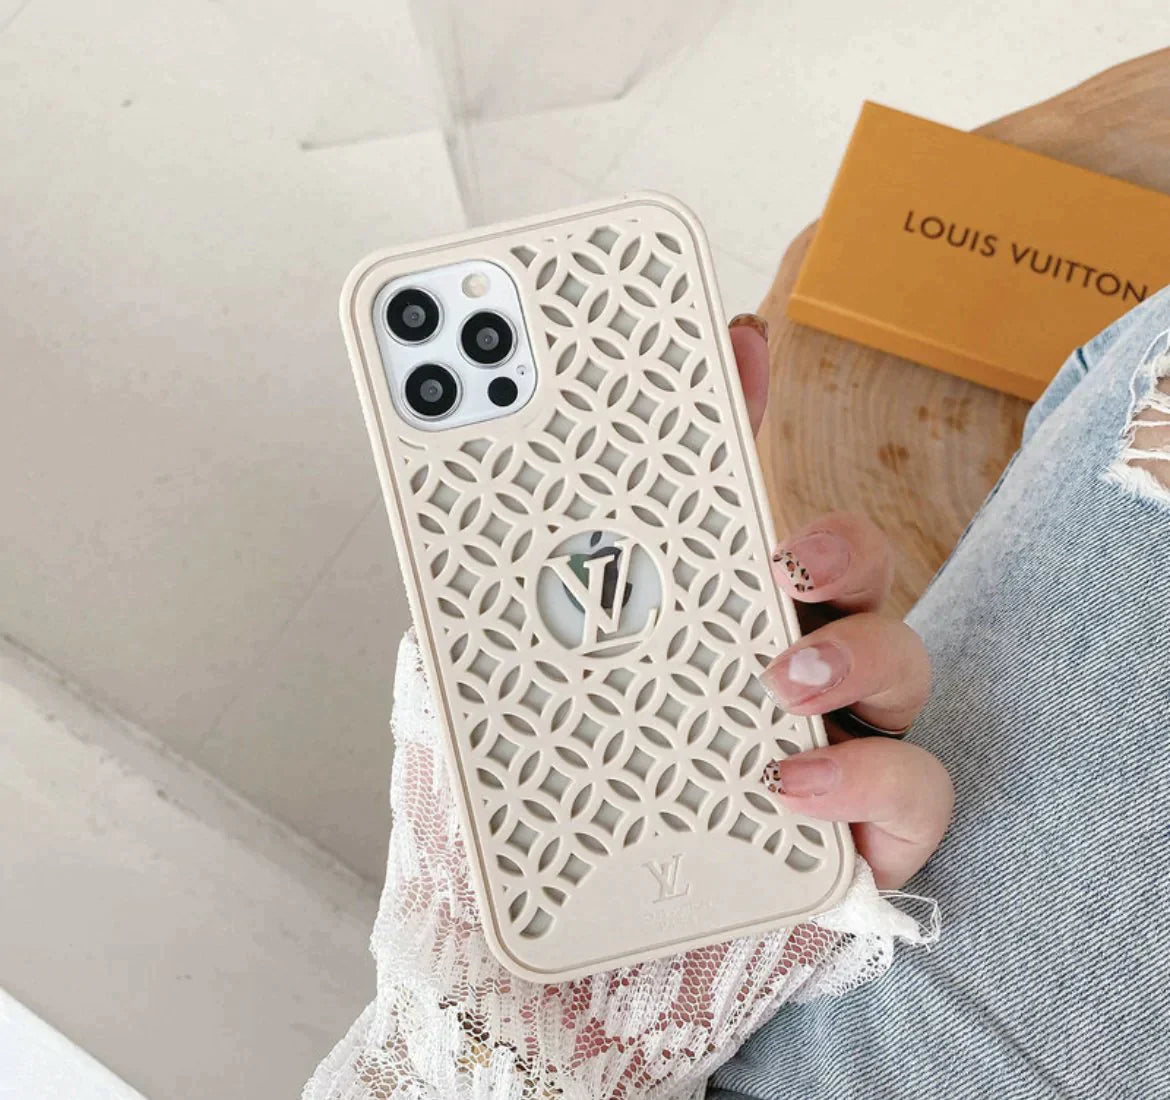 New LV iPhone Cases